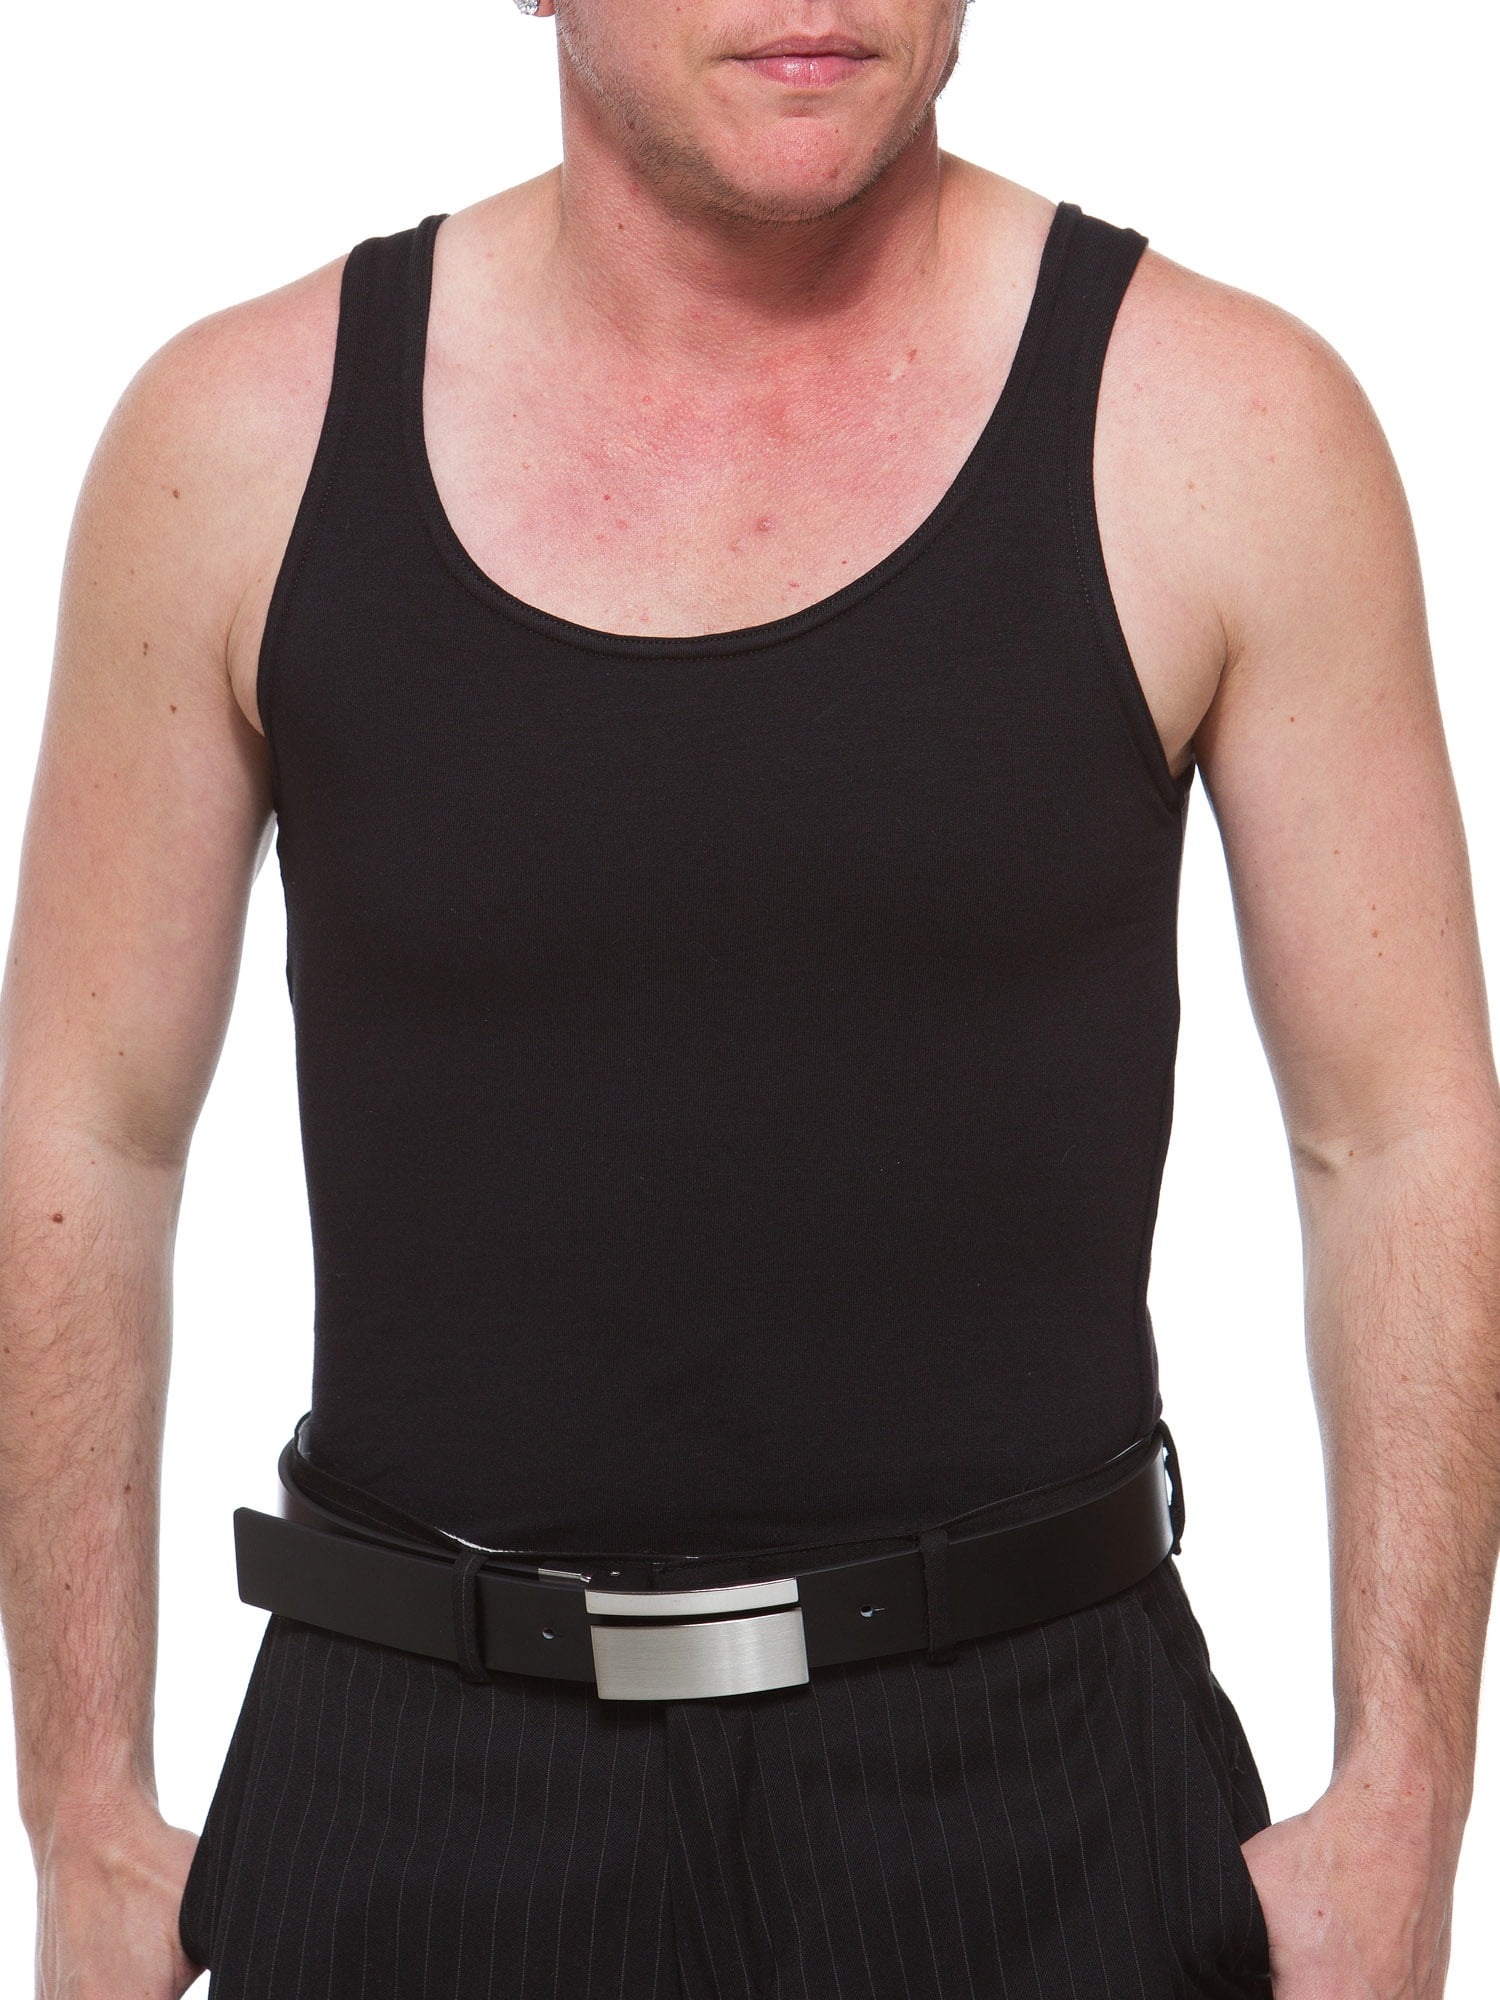 Just learned that Underworks has an outlet tab, where they sell the  compression top binders for $10 (reg. $33) : r/ftm